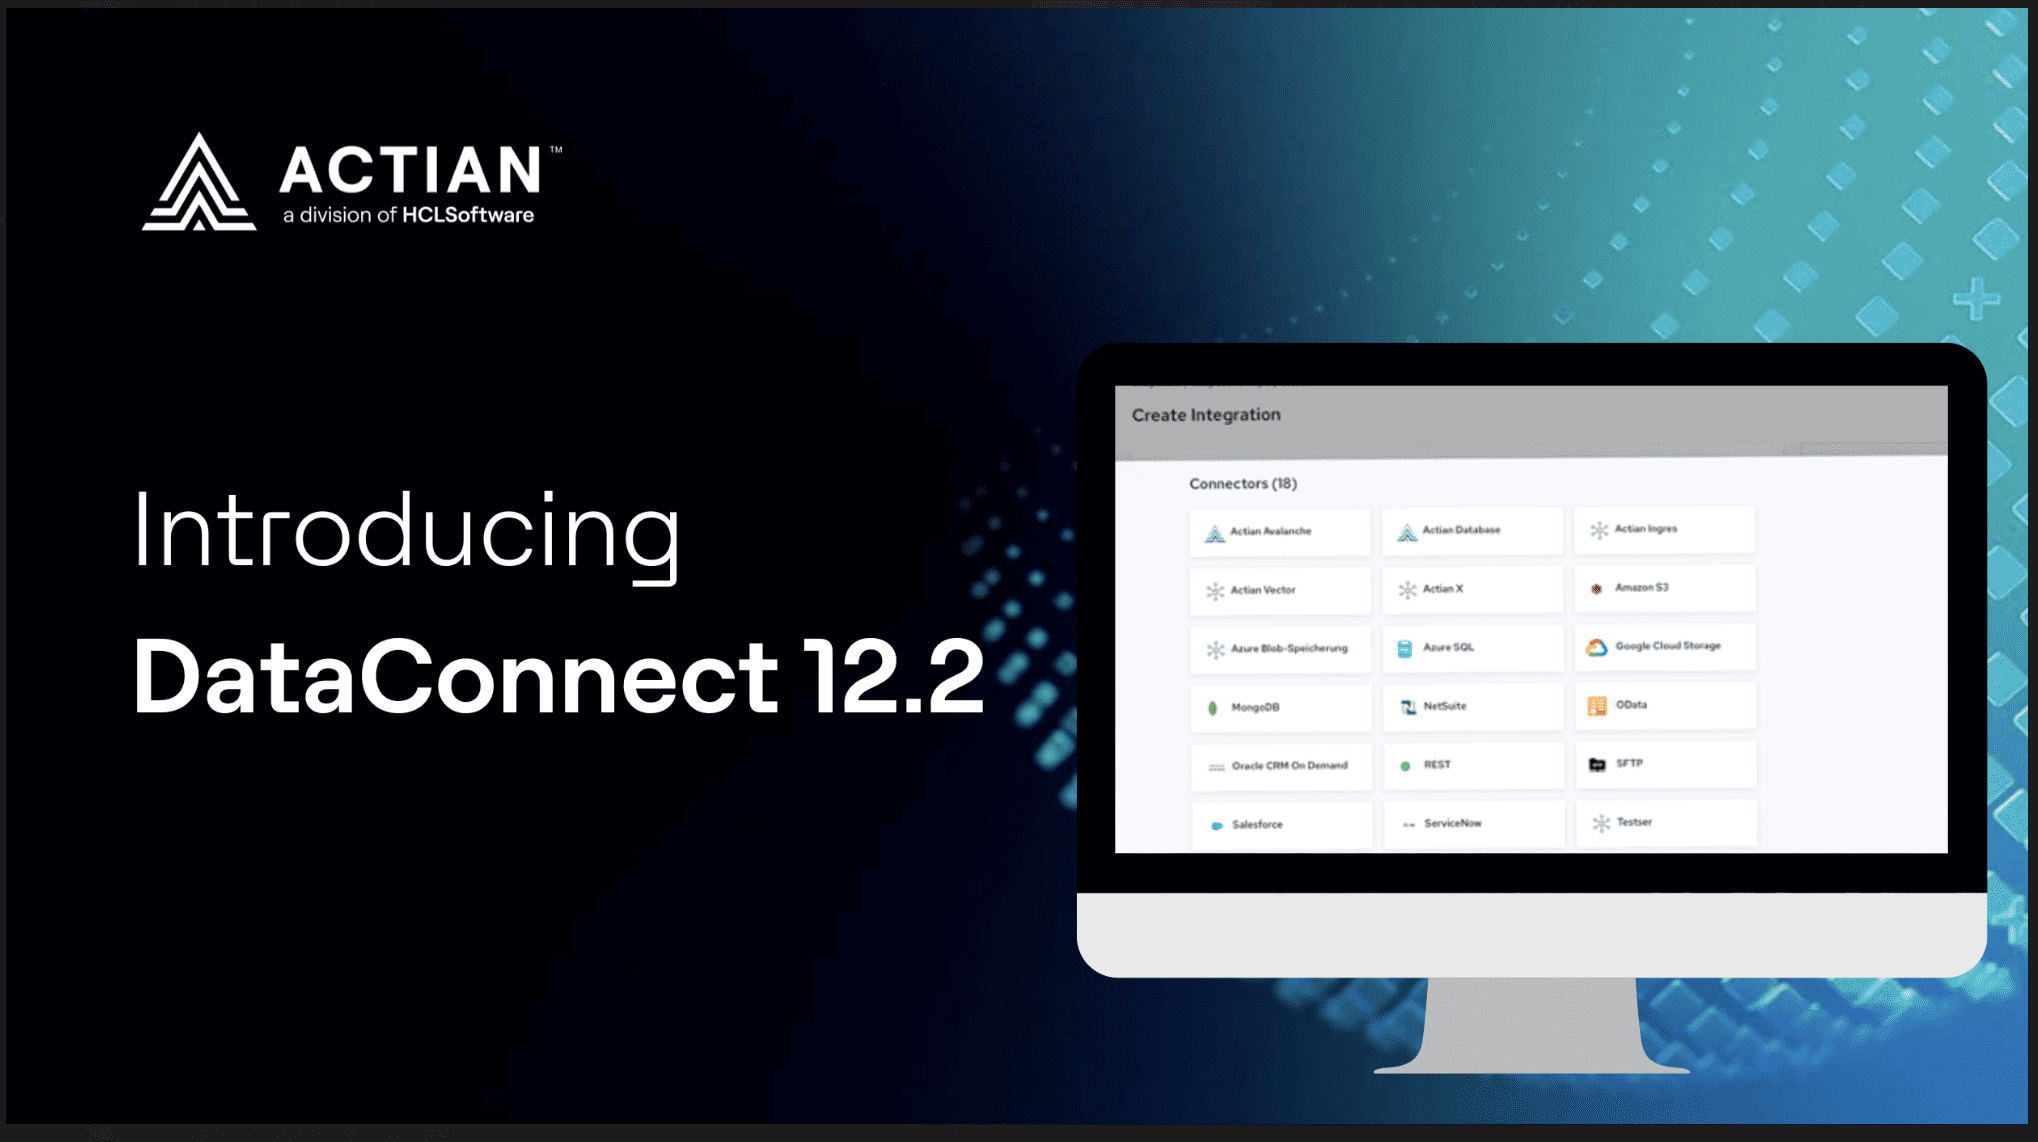 Data Integration: Actian DataConnect 12.2 is finally here